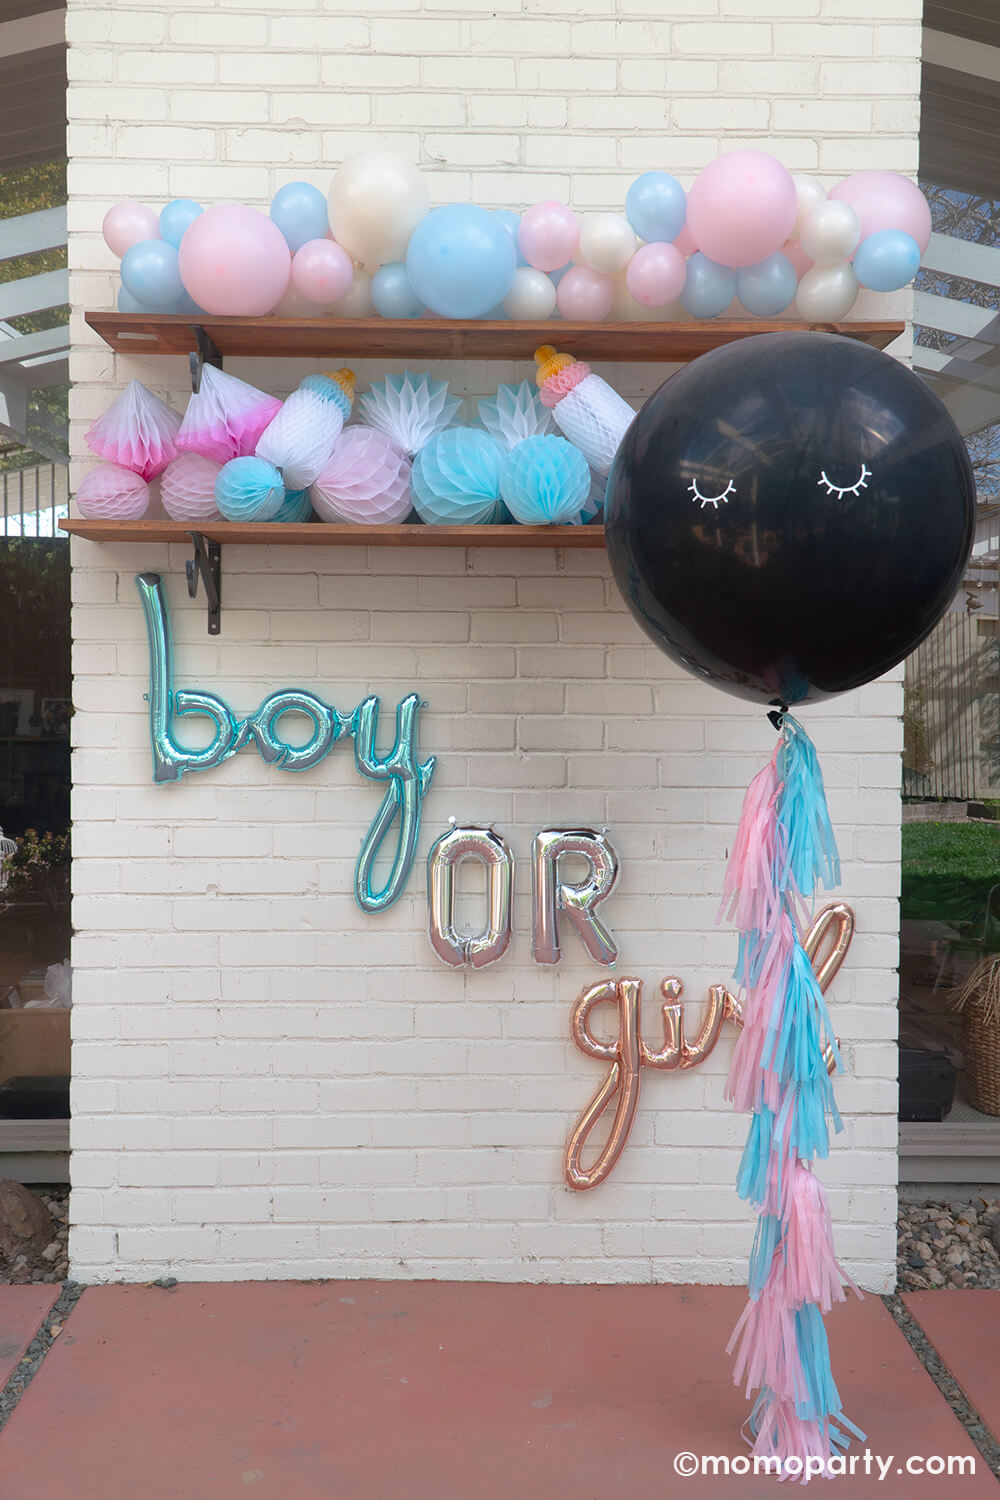 Boy or girl? A gender revel party by Momo Party, a brick wall decorated with script foil letter balloons and a wall filled with honeycomb decorations in pink and blue and a boho pastel color balloon garland in baby pink and baby blue colors. In the front is the jumbo gender reveal confetti balloon decorated with pink and blue tassel, ready to be popped to reveal baby's gender!